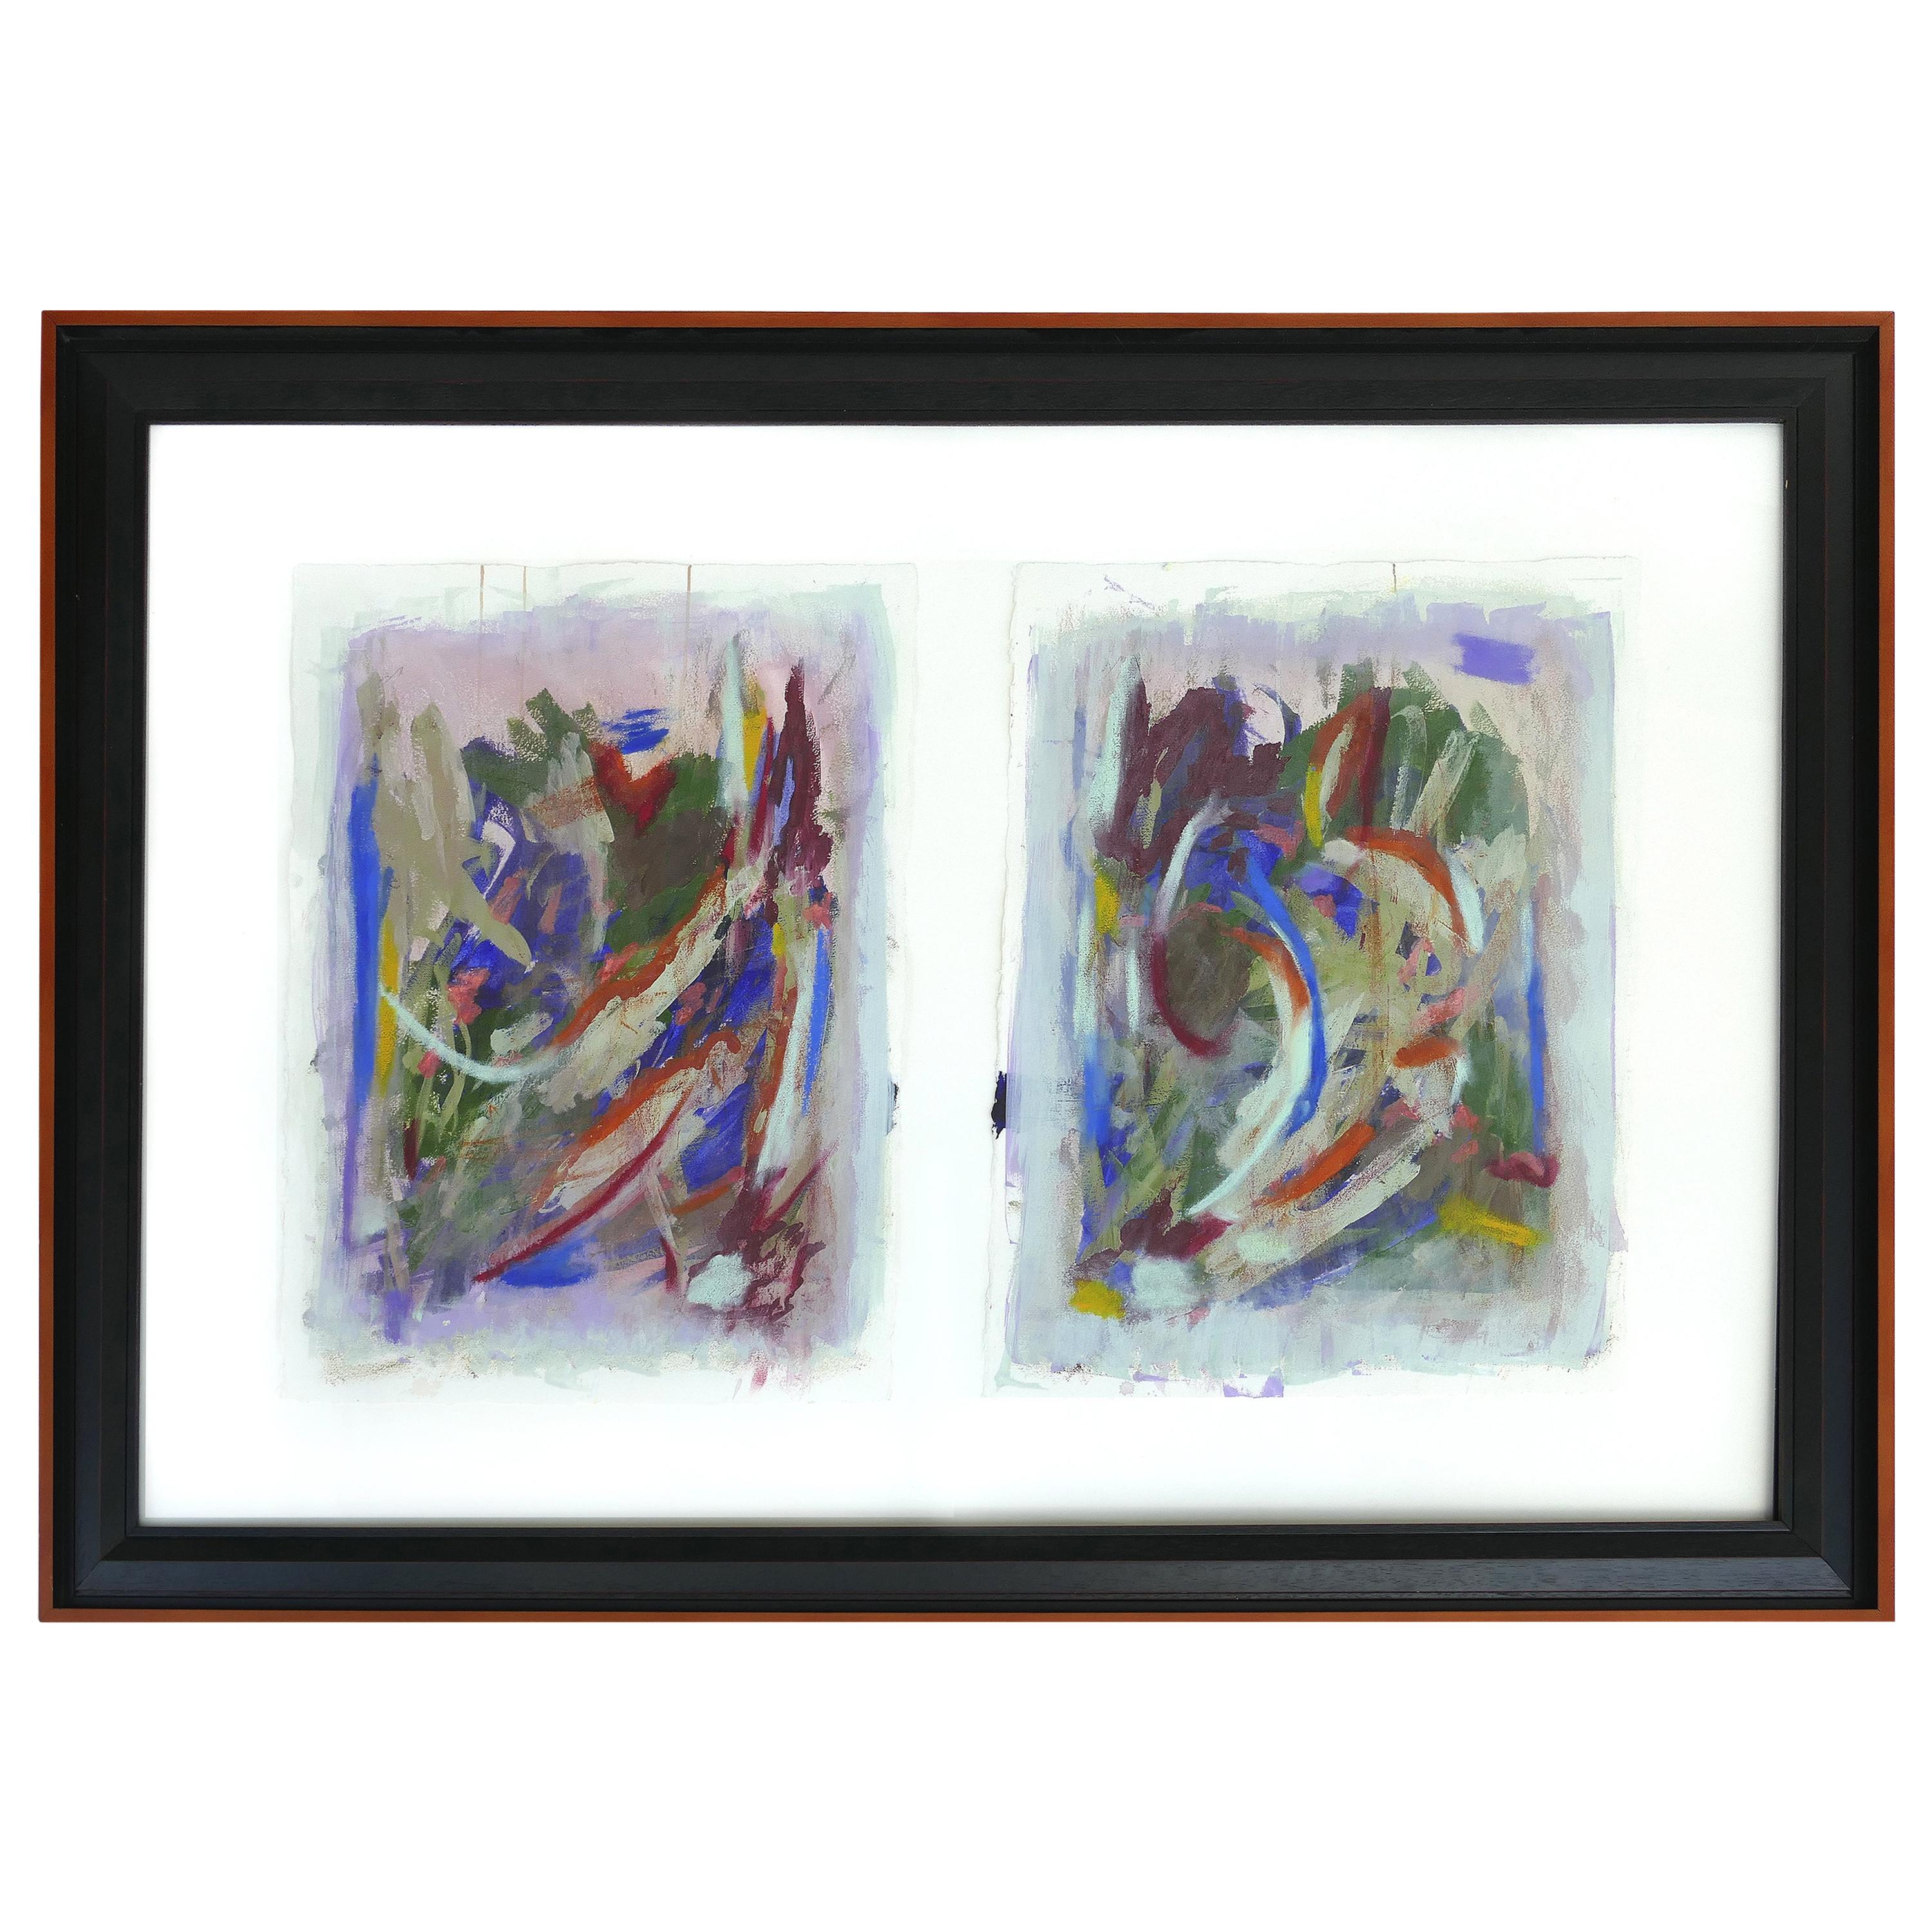 Large Vintage Abstract Diptych Painting, Signed, 2014, Framed Under Glass